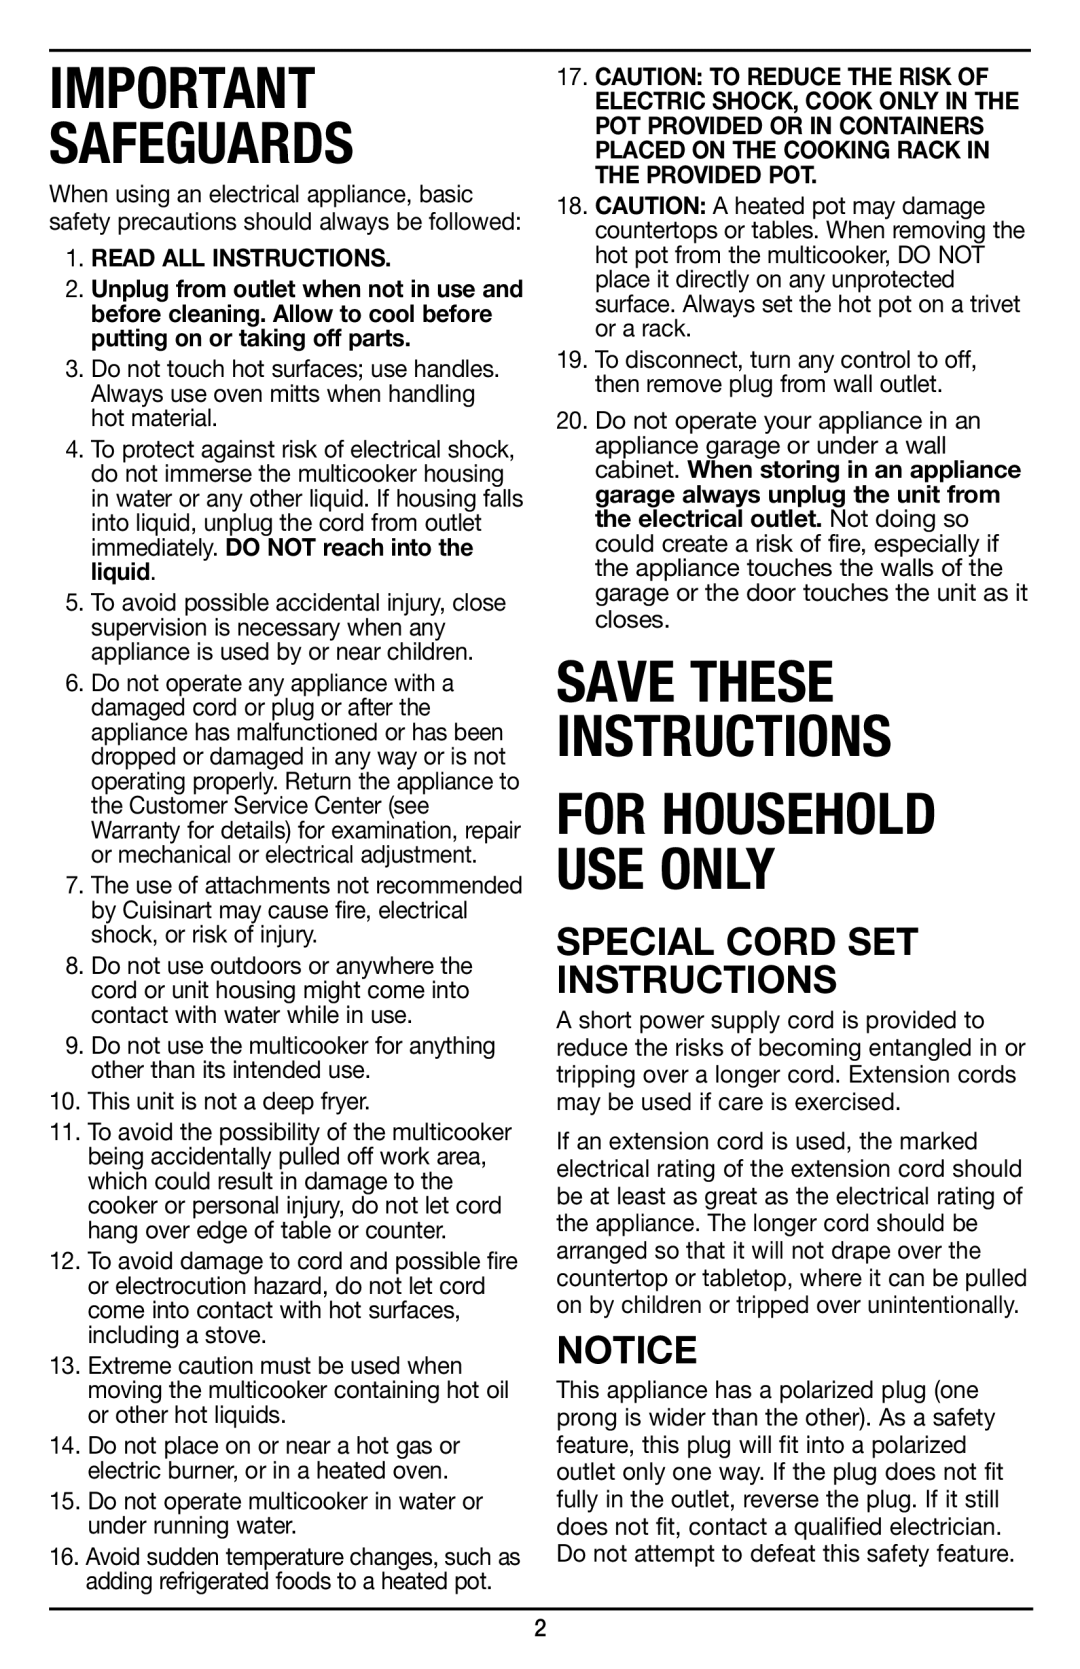 Cuisinart MSC-600 manual Special Cord Set Instructions, Safeguards, Save These Instructions, For Household Use Only 